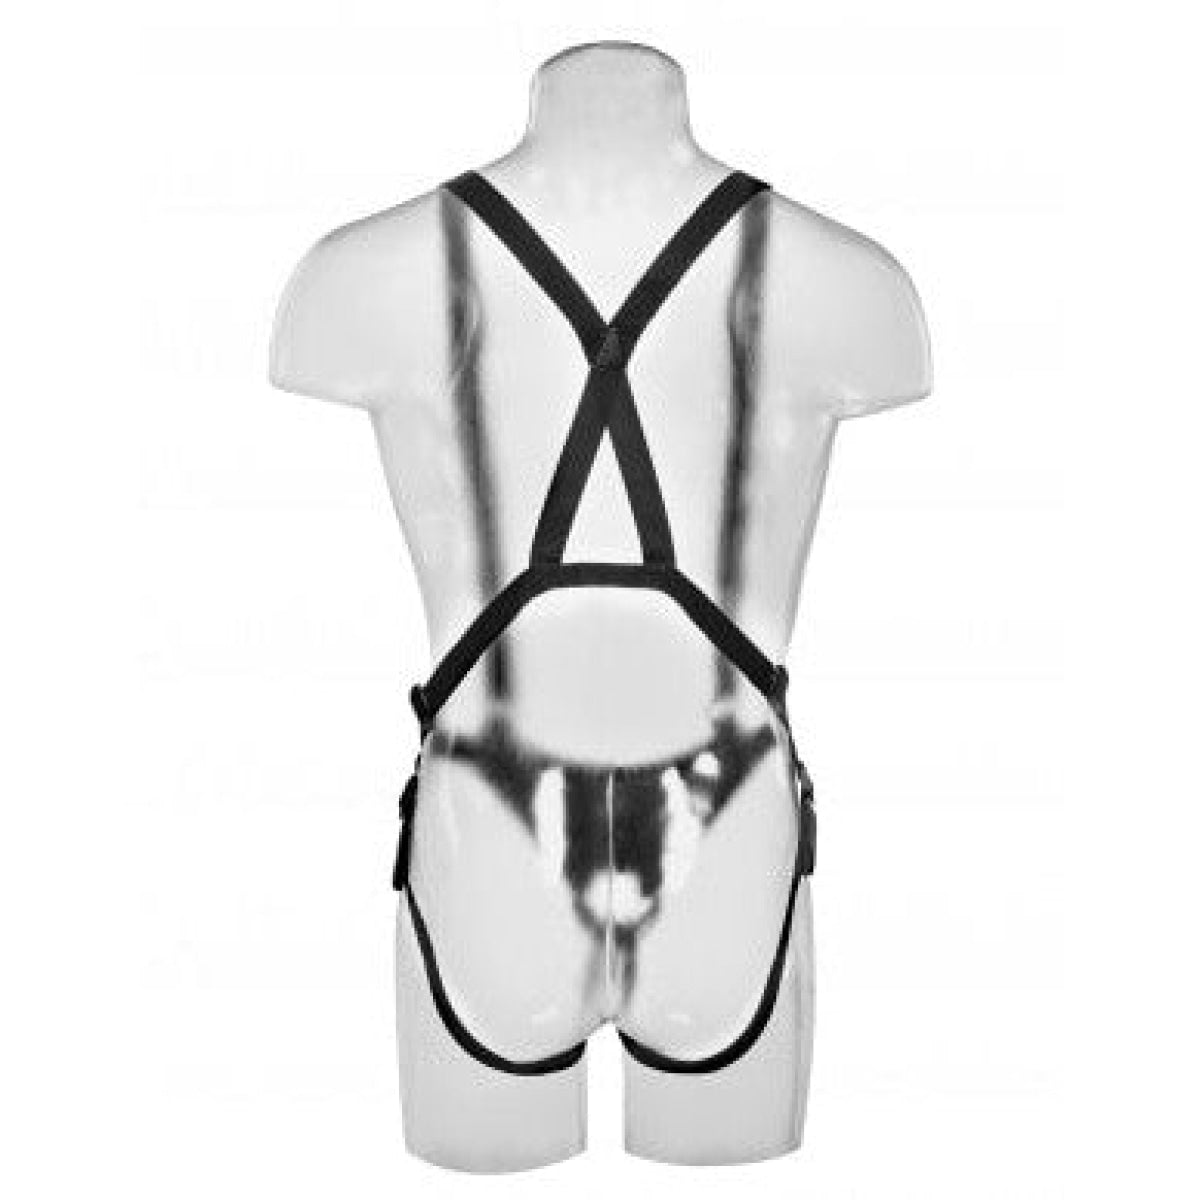 King Cock 12 In Hollow Strap On Suspender System Light- Black Intimates Adult Boutique